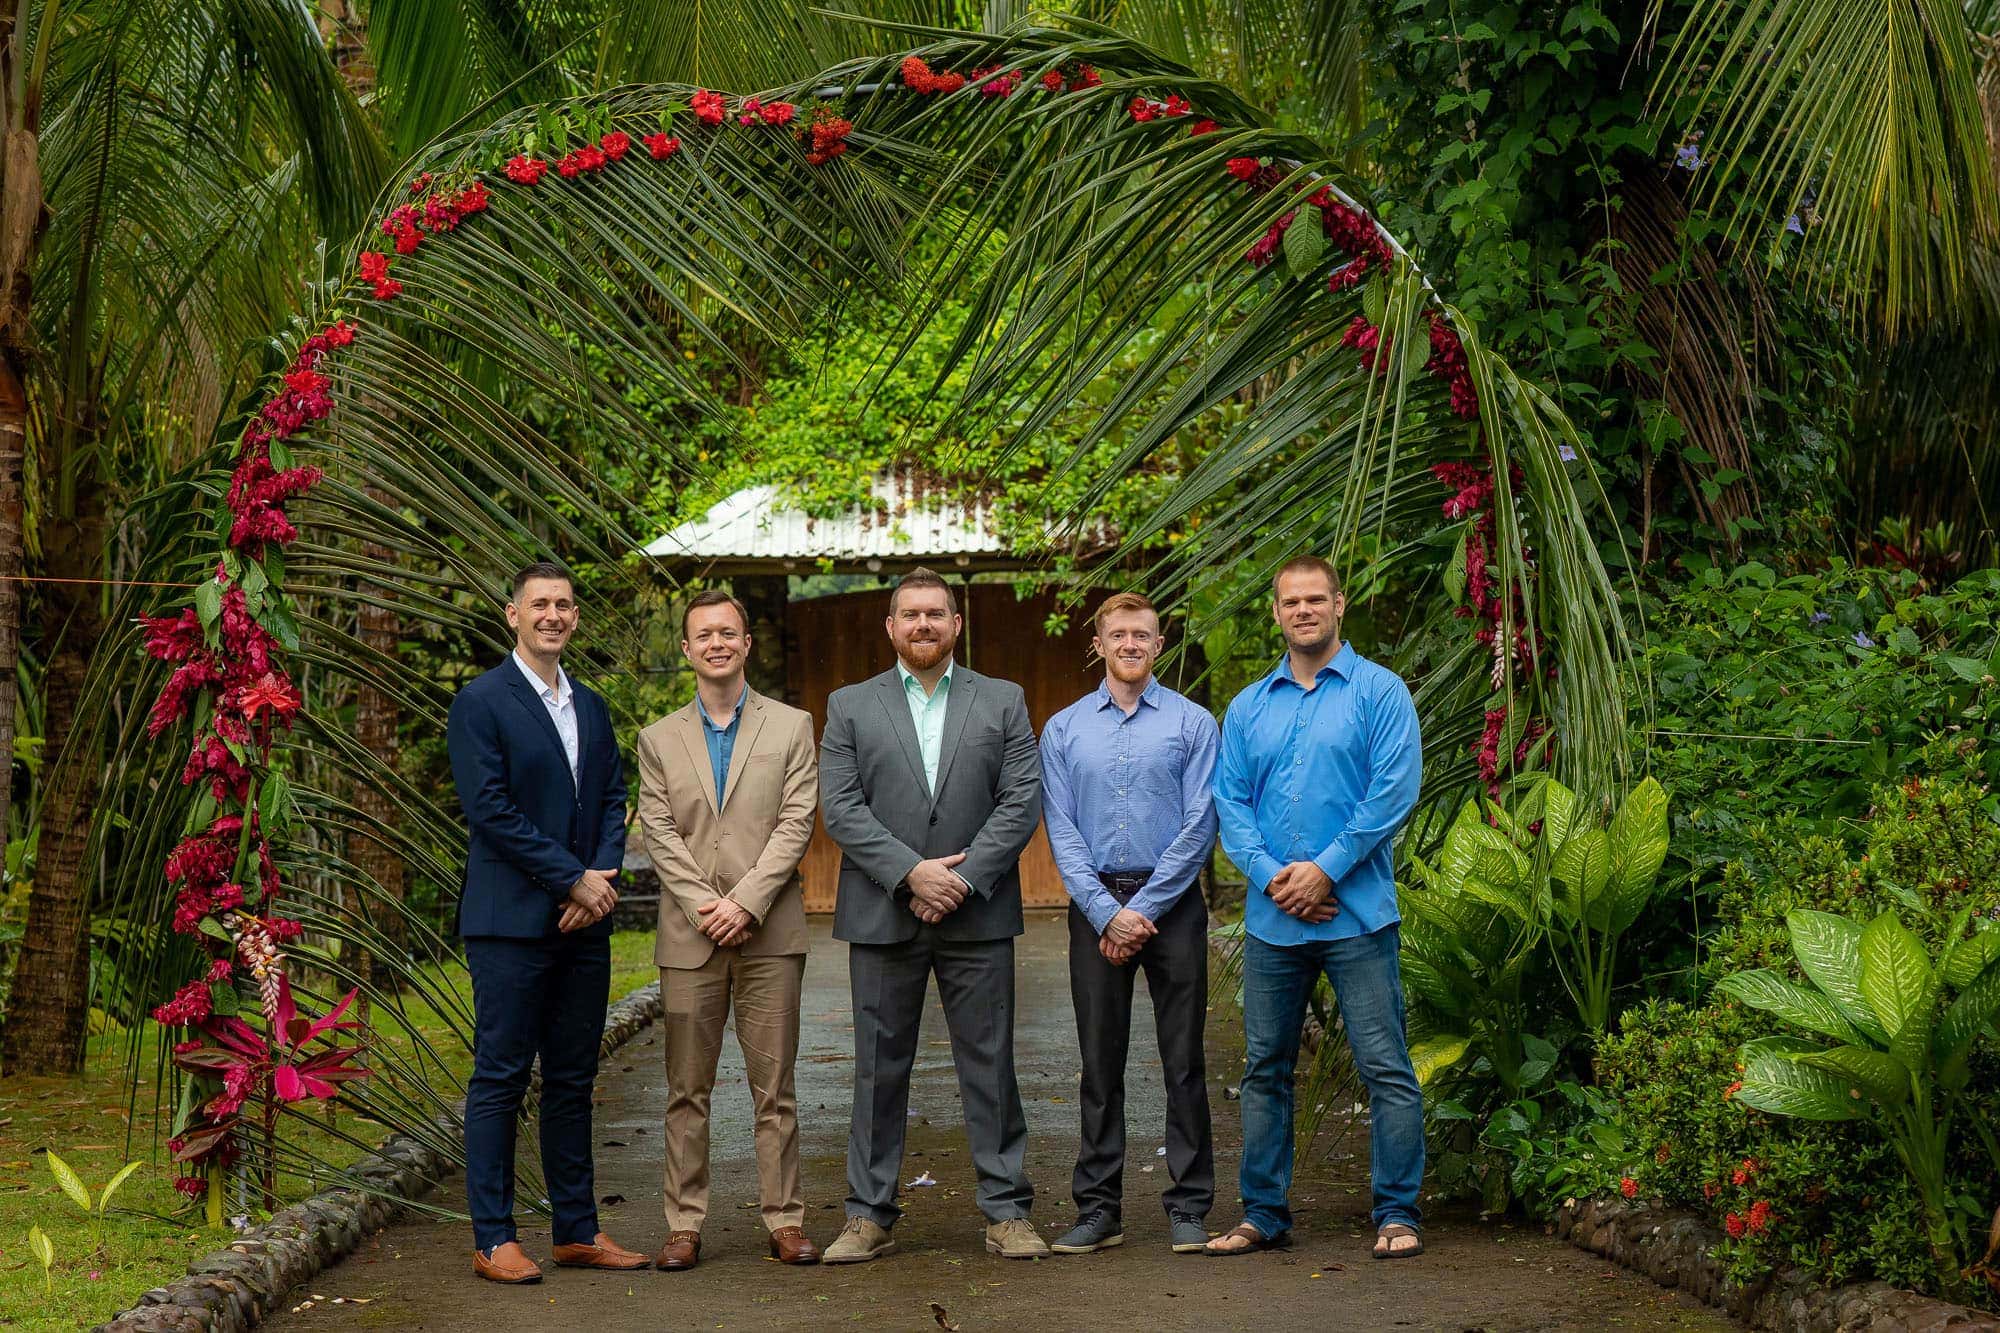 The groom and his groomsmen prepping for a Costa Rica jungle wedding